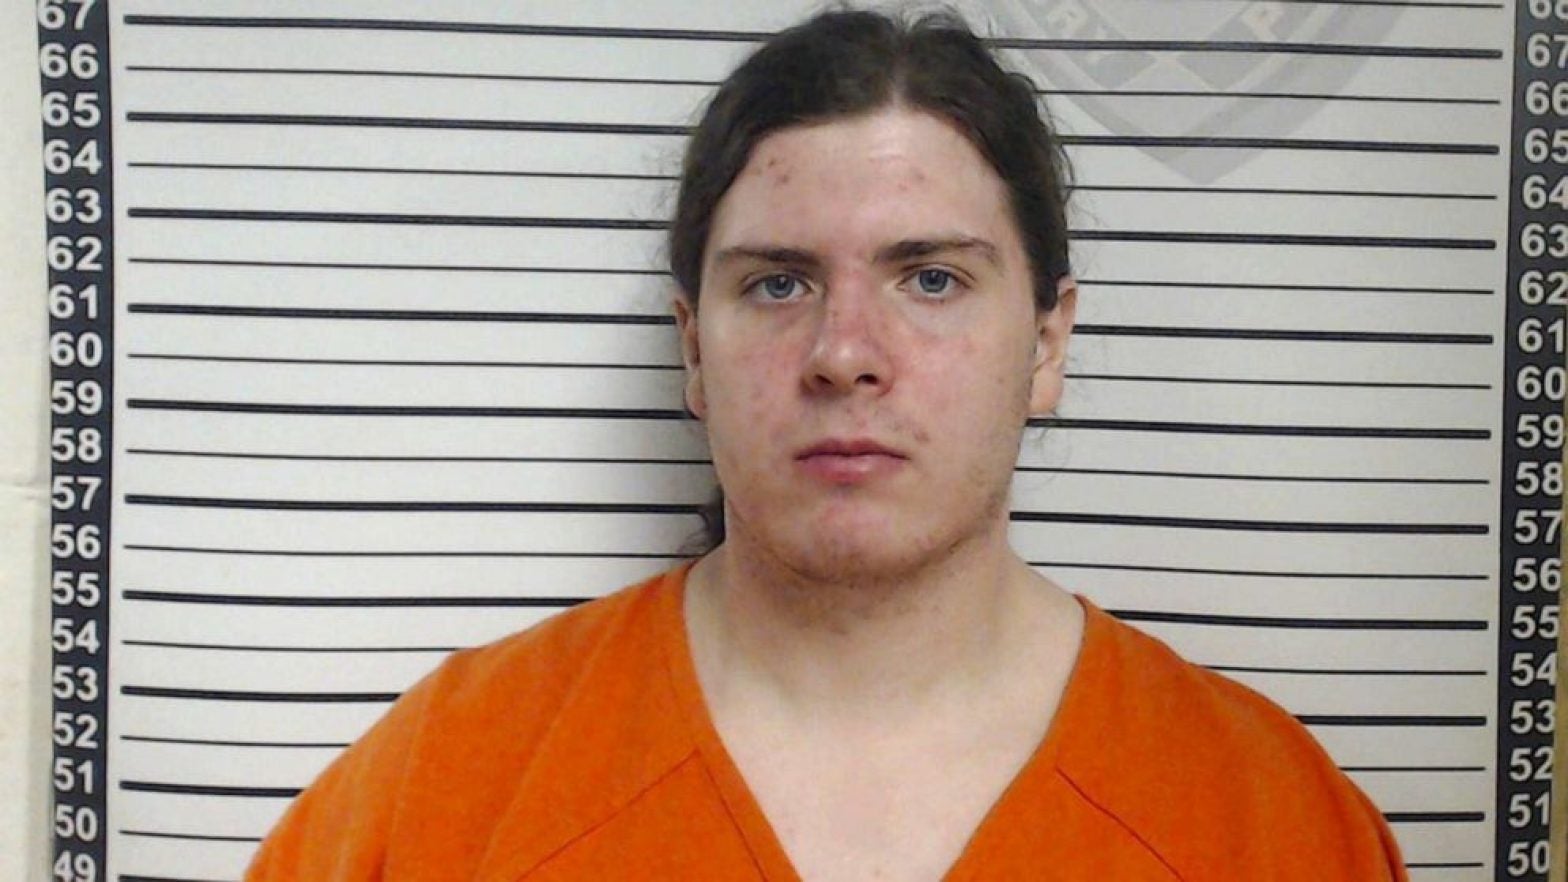 Holden Matthews Sentenced To 25 Years In Prison For Torching 3 Historically Black Churches In Louisiana